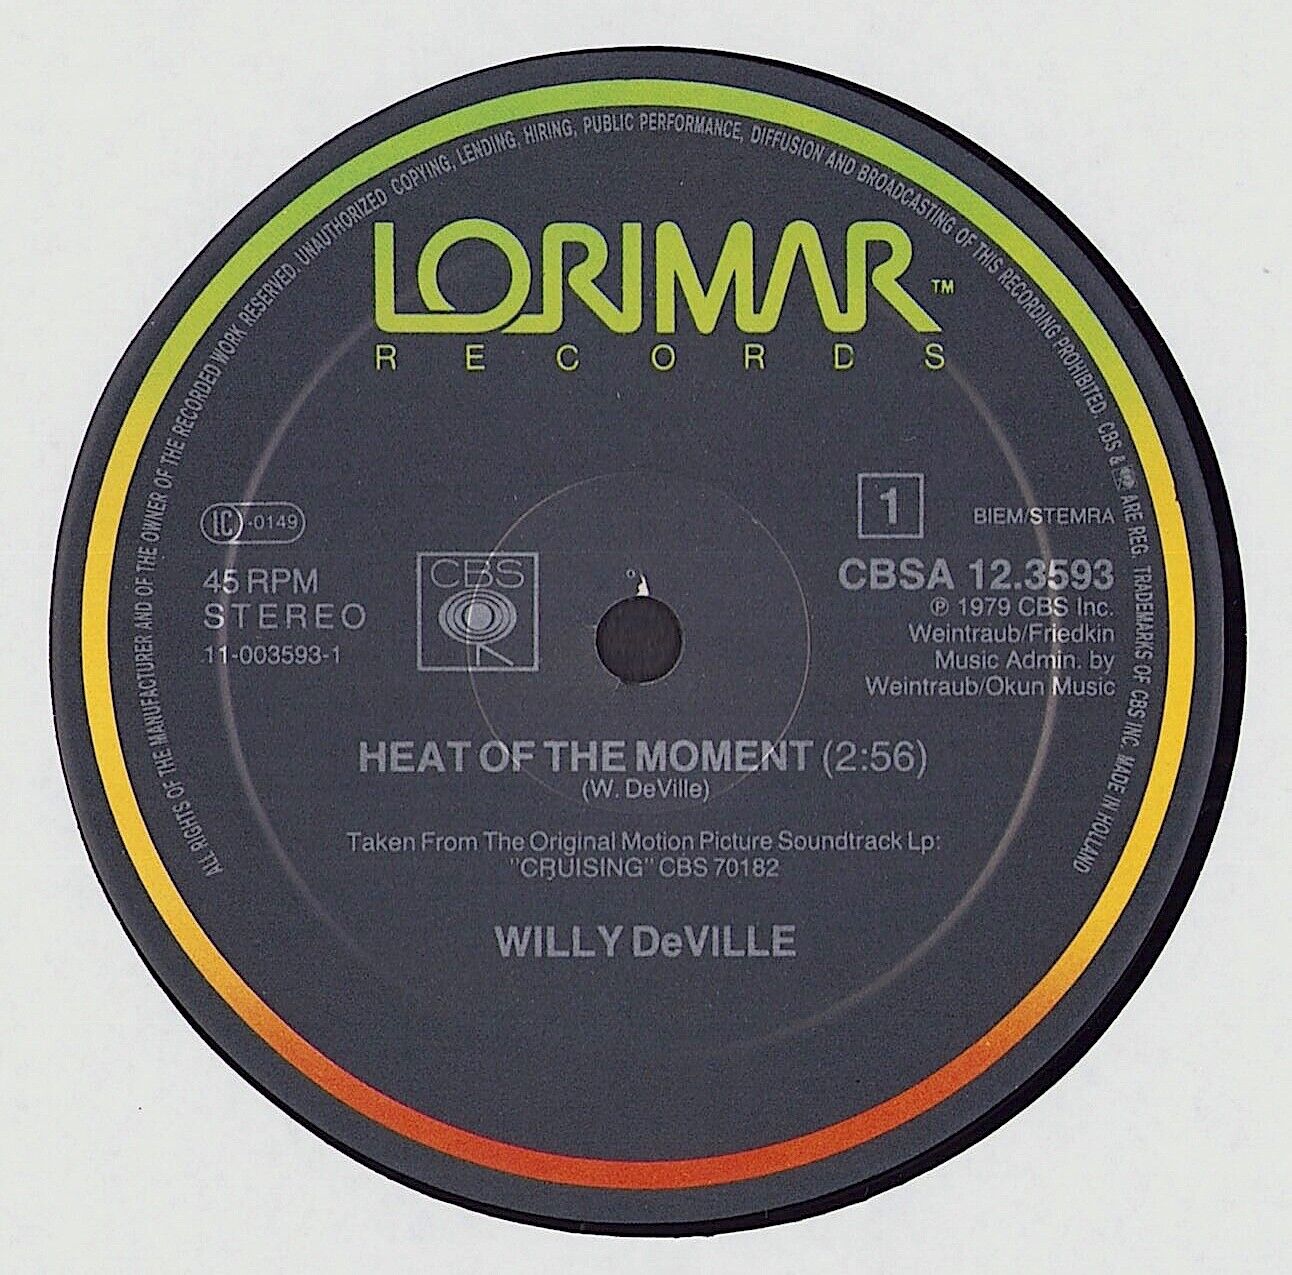 Willy DeVille - Heat Of The Moment Vinyl 12"